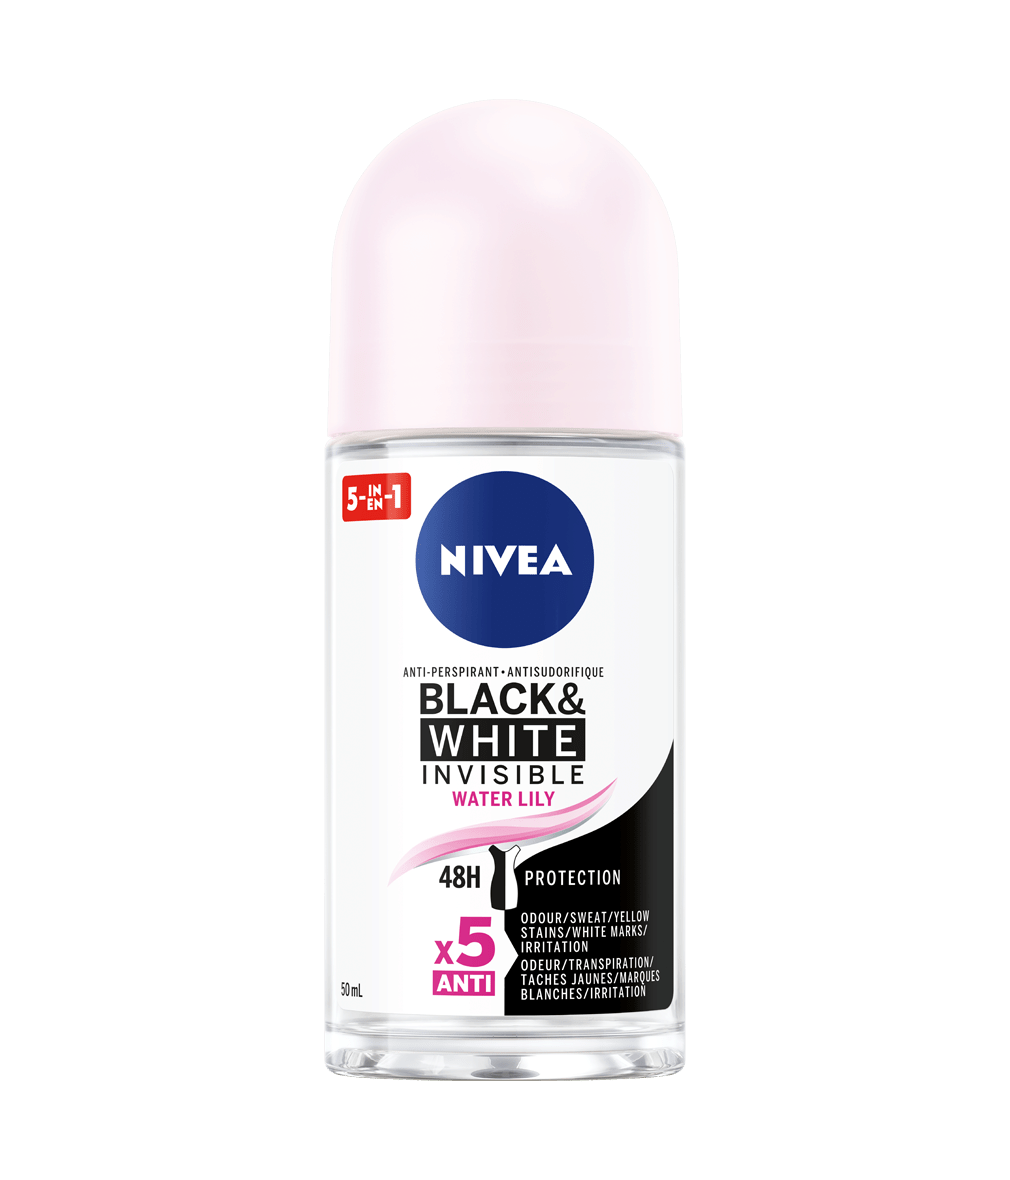 BLACK & WHITE INVISIBLE WATER LILY ANTI-PERSPIRANT ROLL-ON